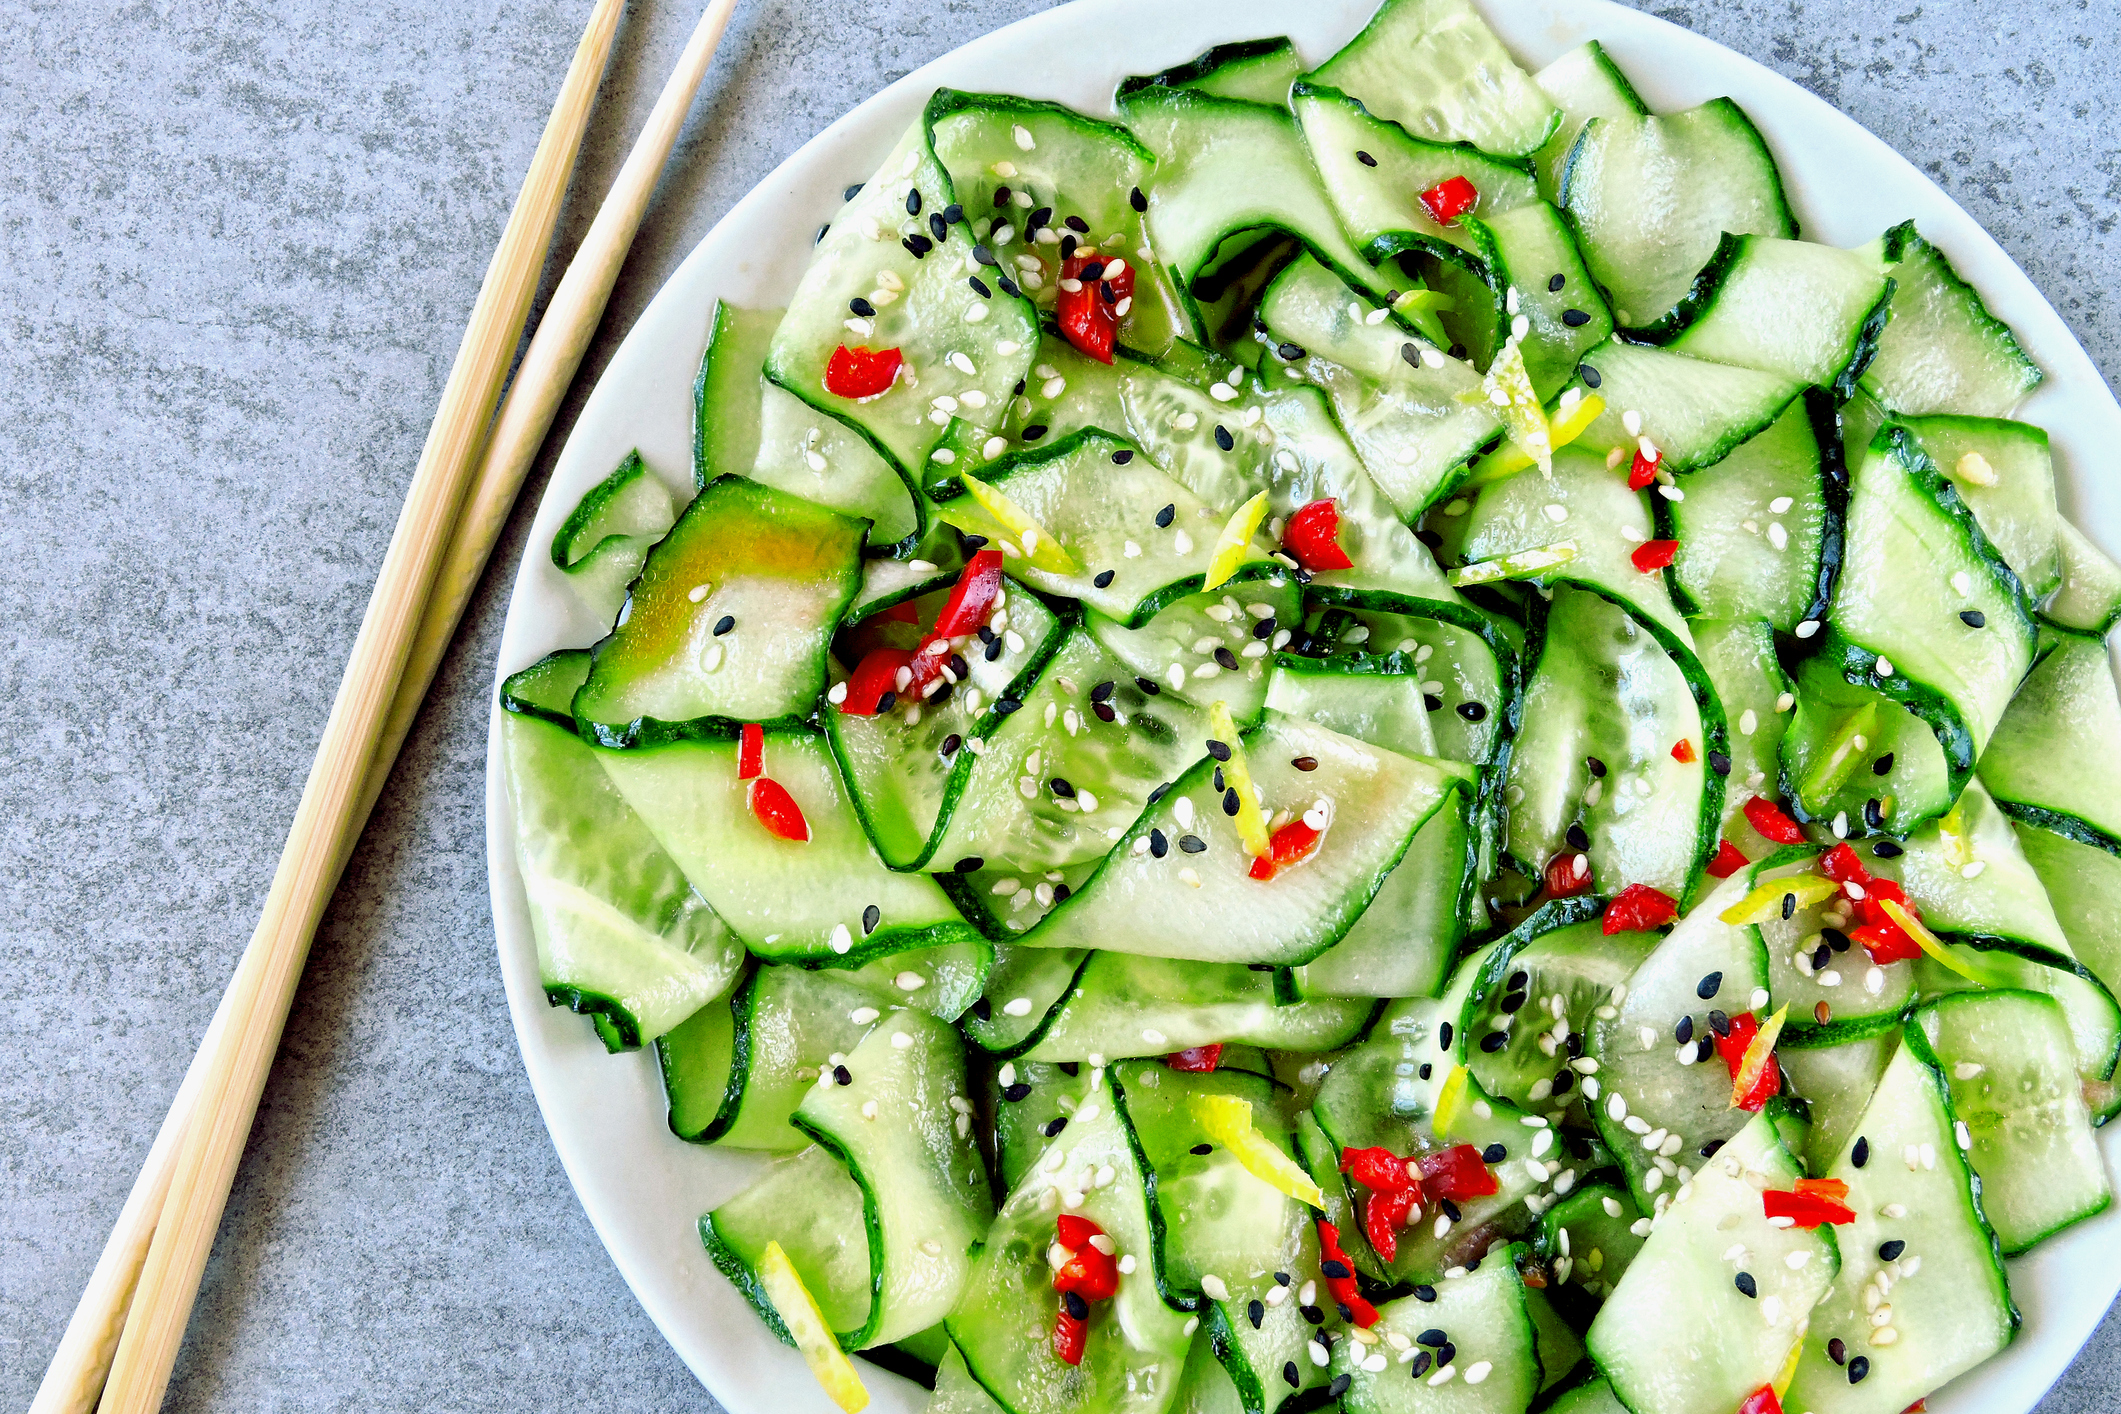 Plate of Salad with Cucumbers | Cucumber Diet